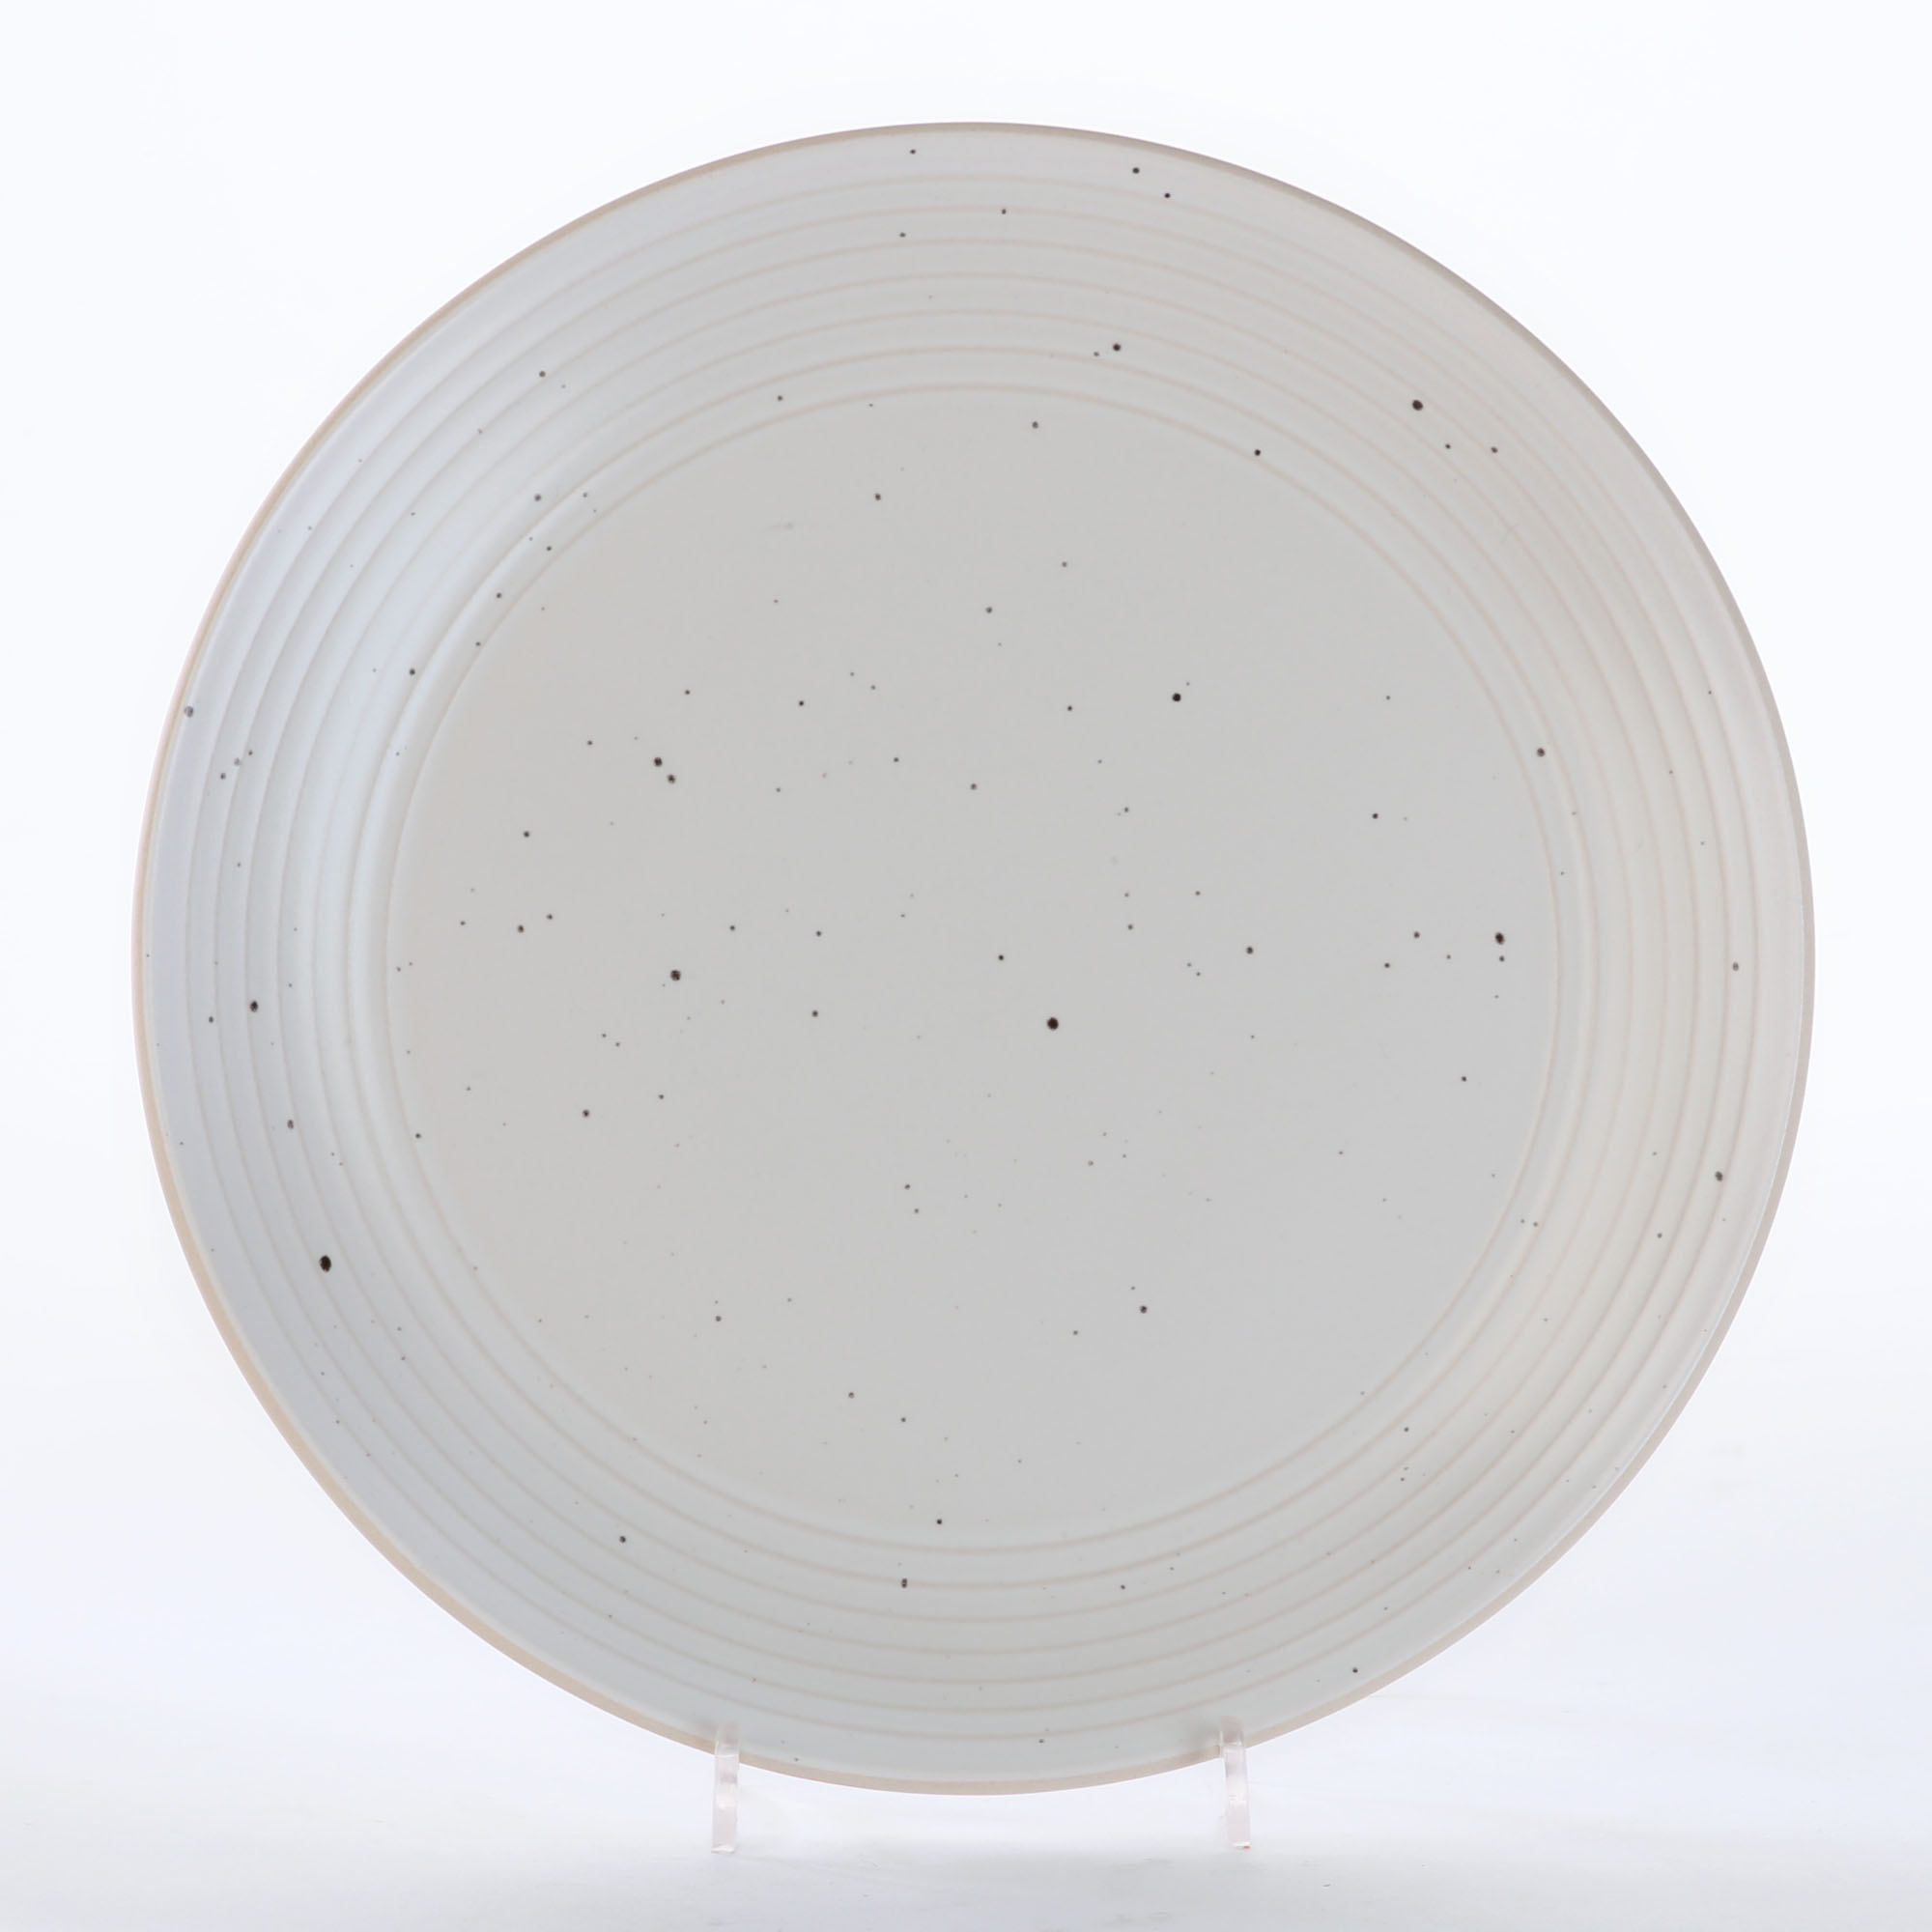 Arthouse at Home Loft Speckle White Side Plate 20.9cm